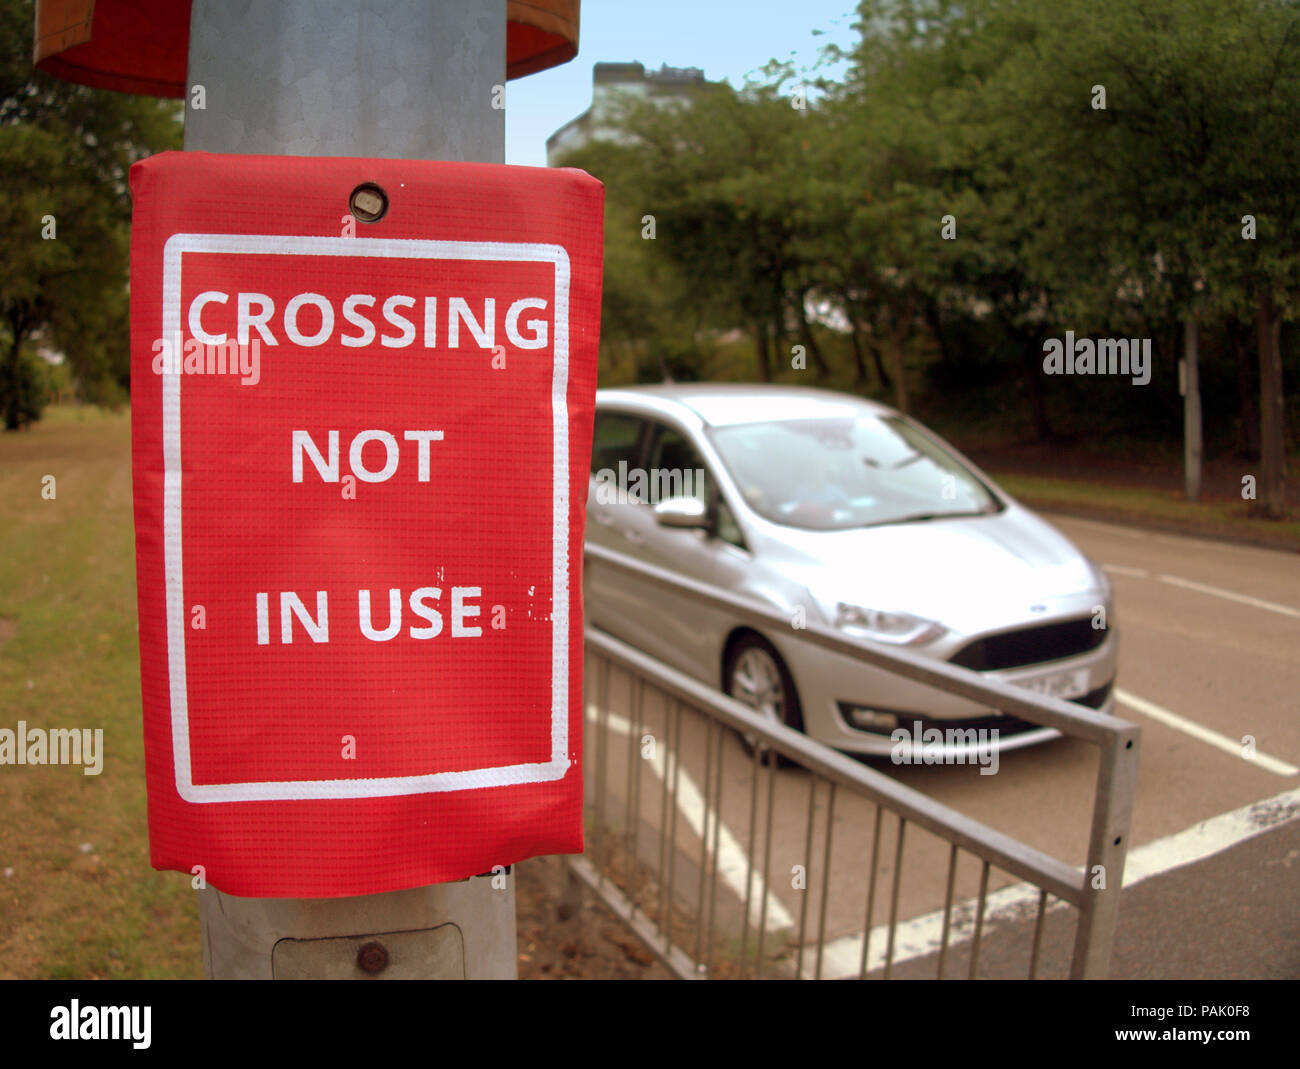 crossing not in use covers pedestrian crossing no lights Stock Photo